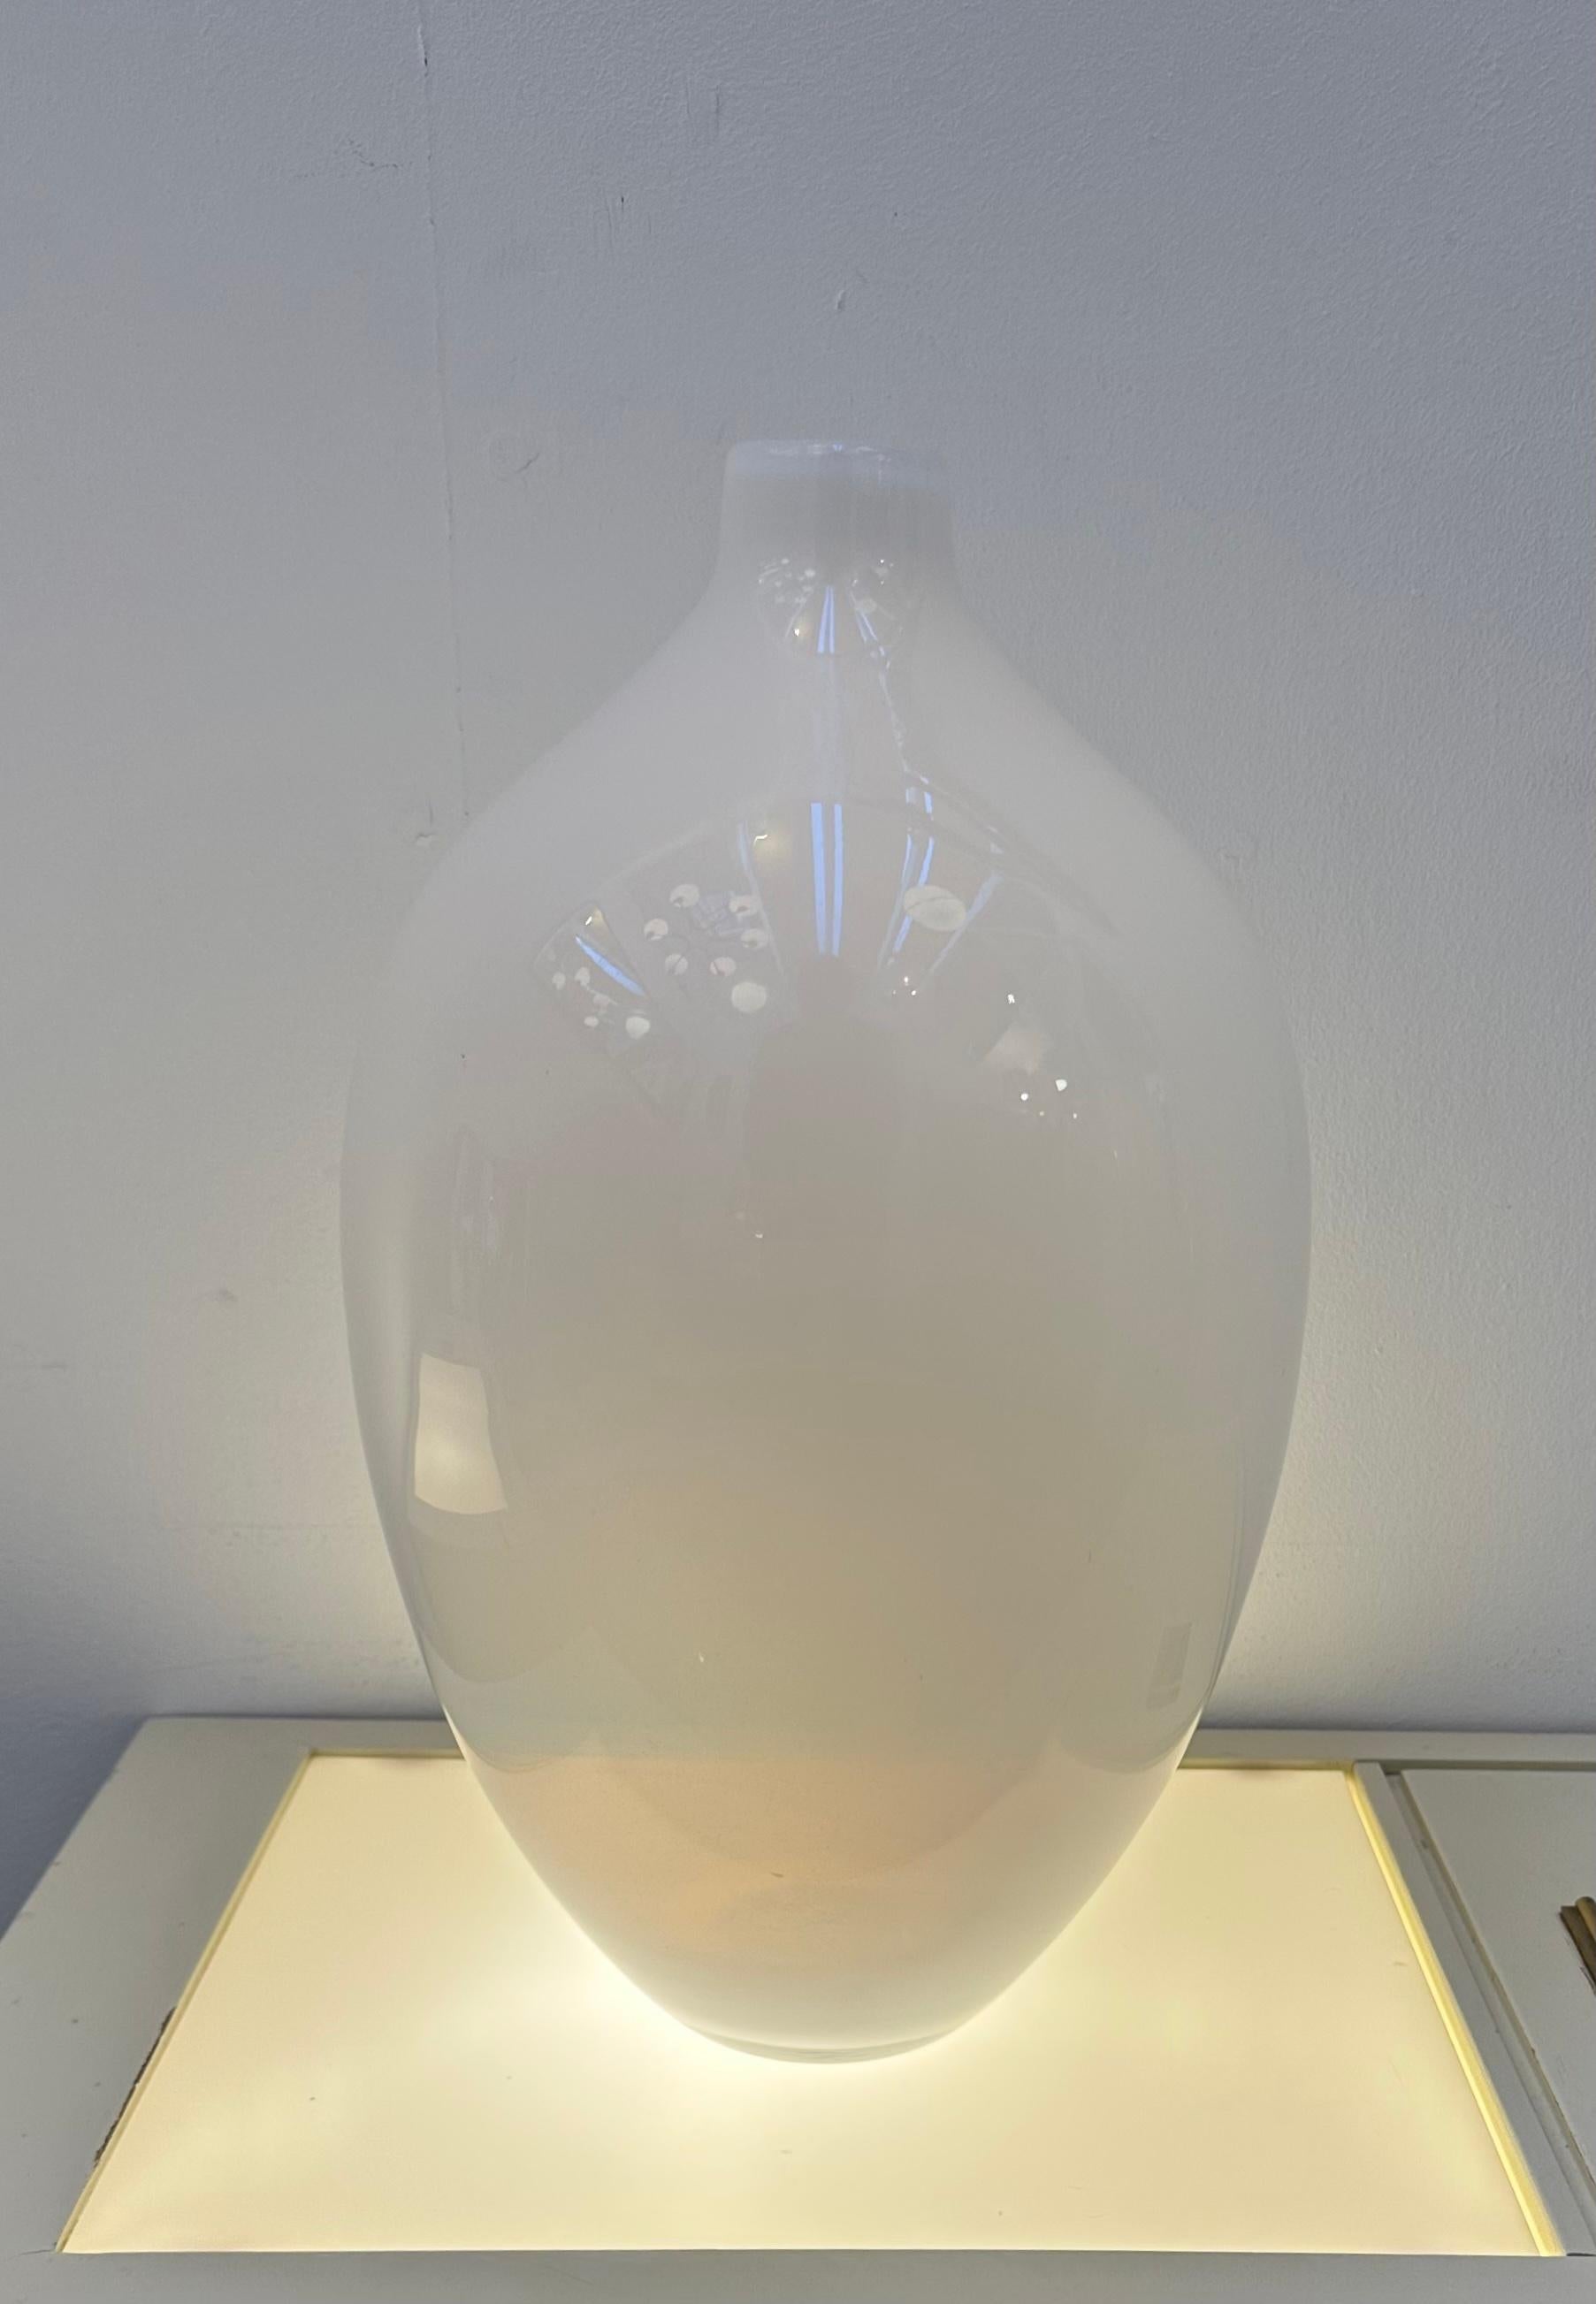 1960s vintage Italian handblown white opalescent milky-white glass bottle vase in an ovoid form. An elegant vase, with a simple yet sophisticated design. The vase is made of white opalescent glass, which gives it a soft, glowing appearance. The vase